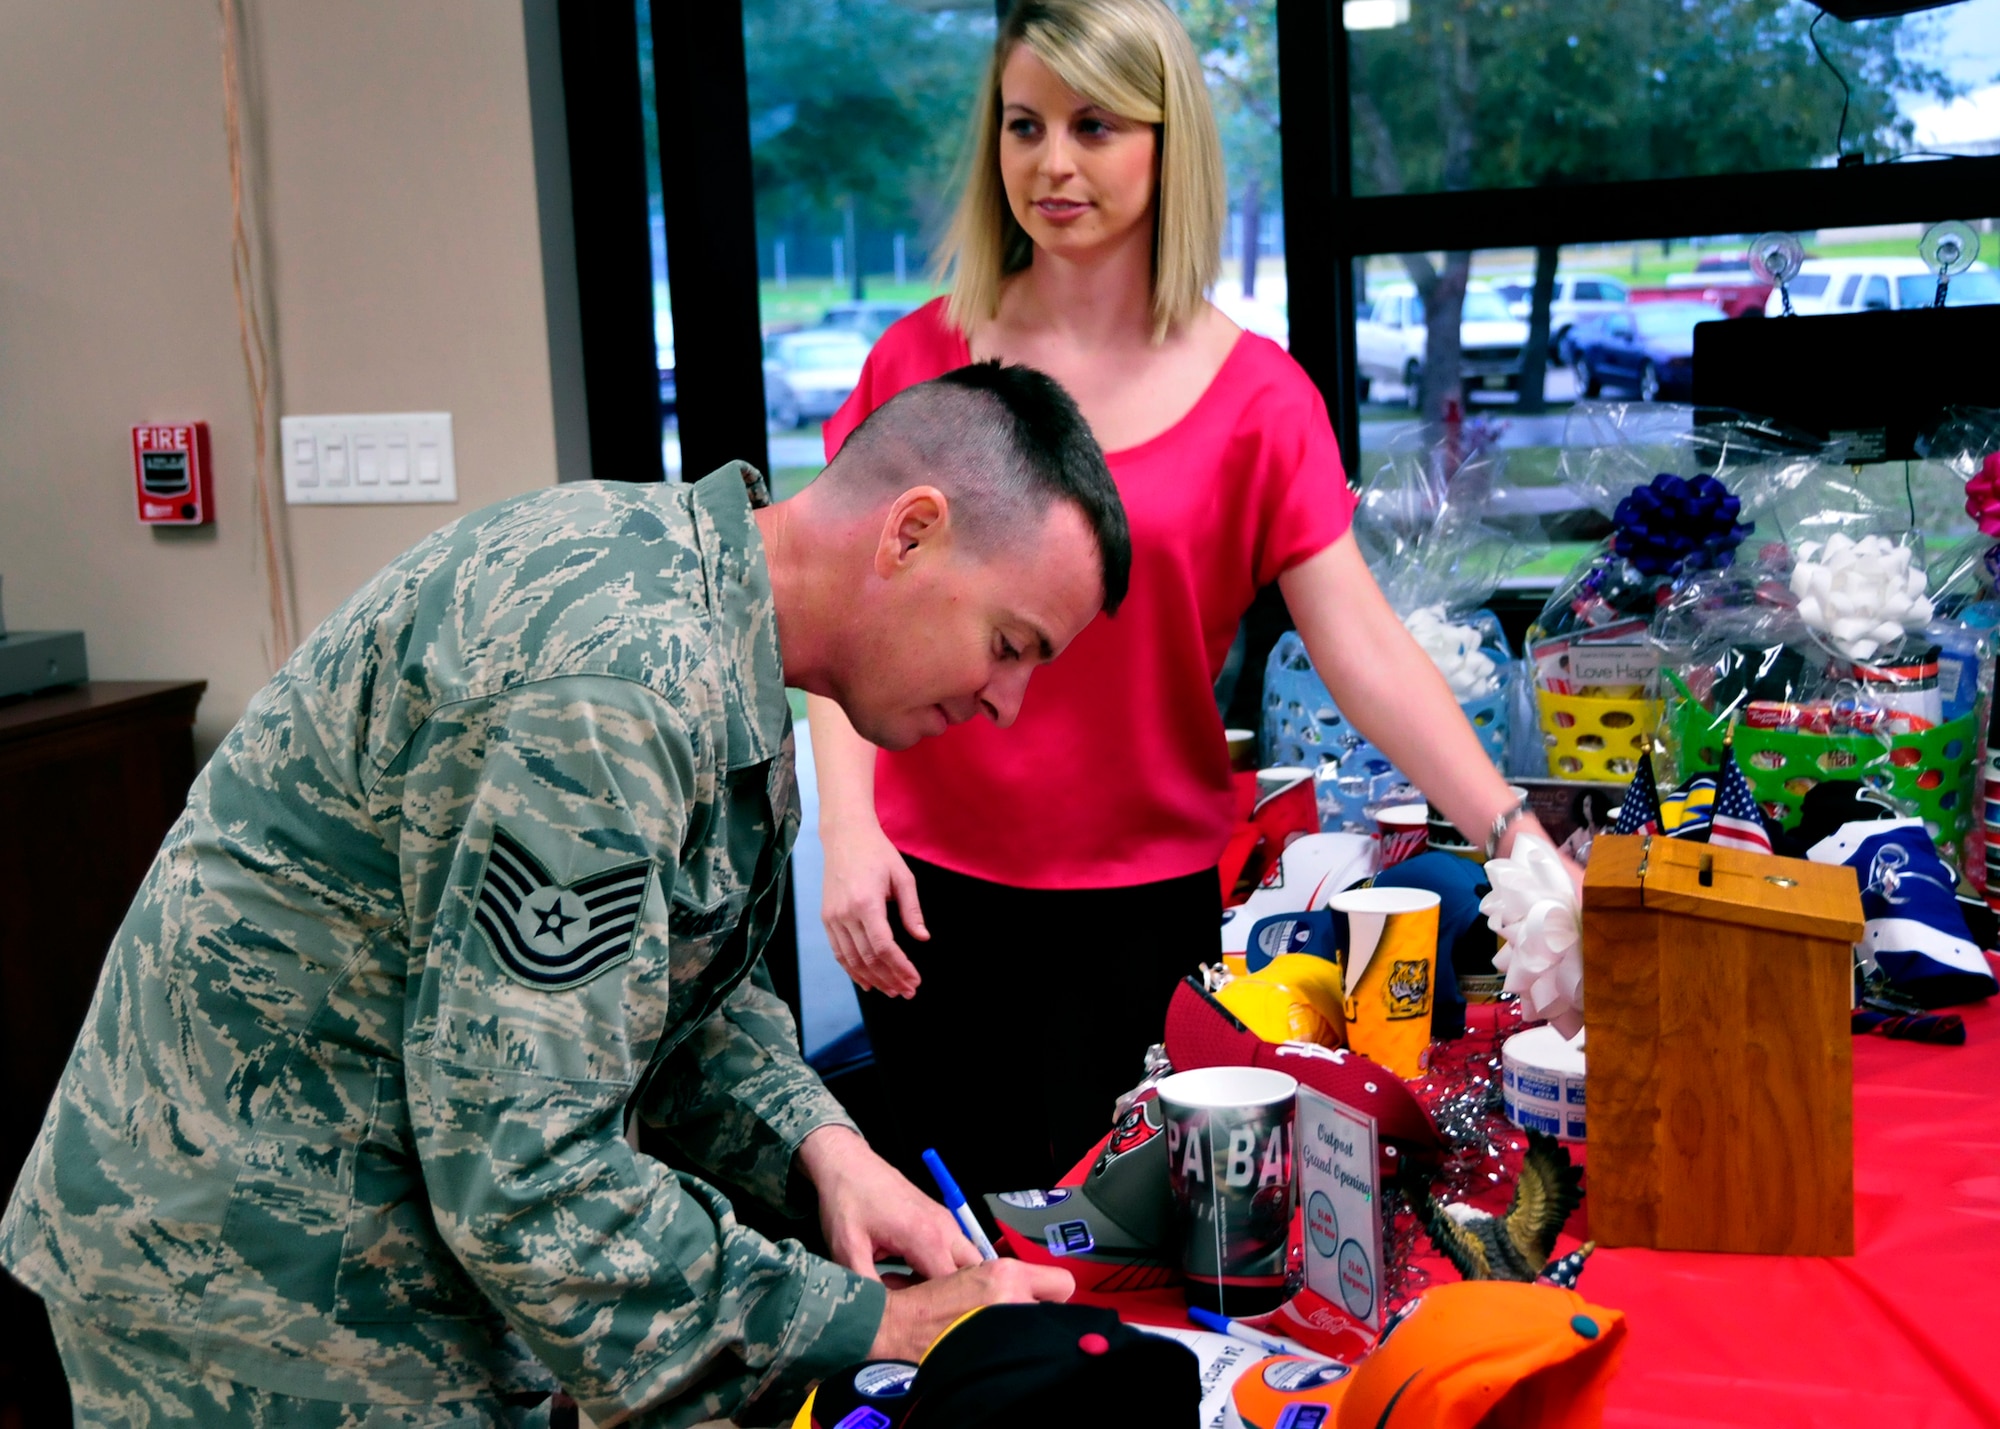 An NCO signs up to win a donated door prize at the grand opening of the newly remodeled Outpost at Duke Field, Fla., recently.   The grand opening featured free food, games, and a live band to showcase the new facility.   The hours of operation are Monday-Friday 11 a.m. to 1 p.m. for lunch, Fridays and UTA Saturdays 3-8 p.m.  (U.S. Air Force photo/Tech. Sgt. Jasmin Taylor)